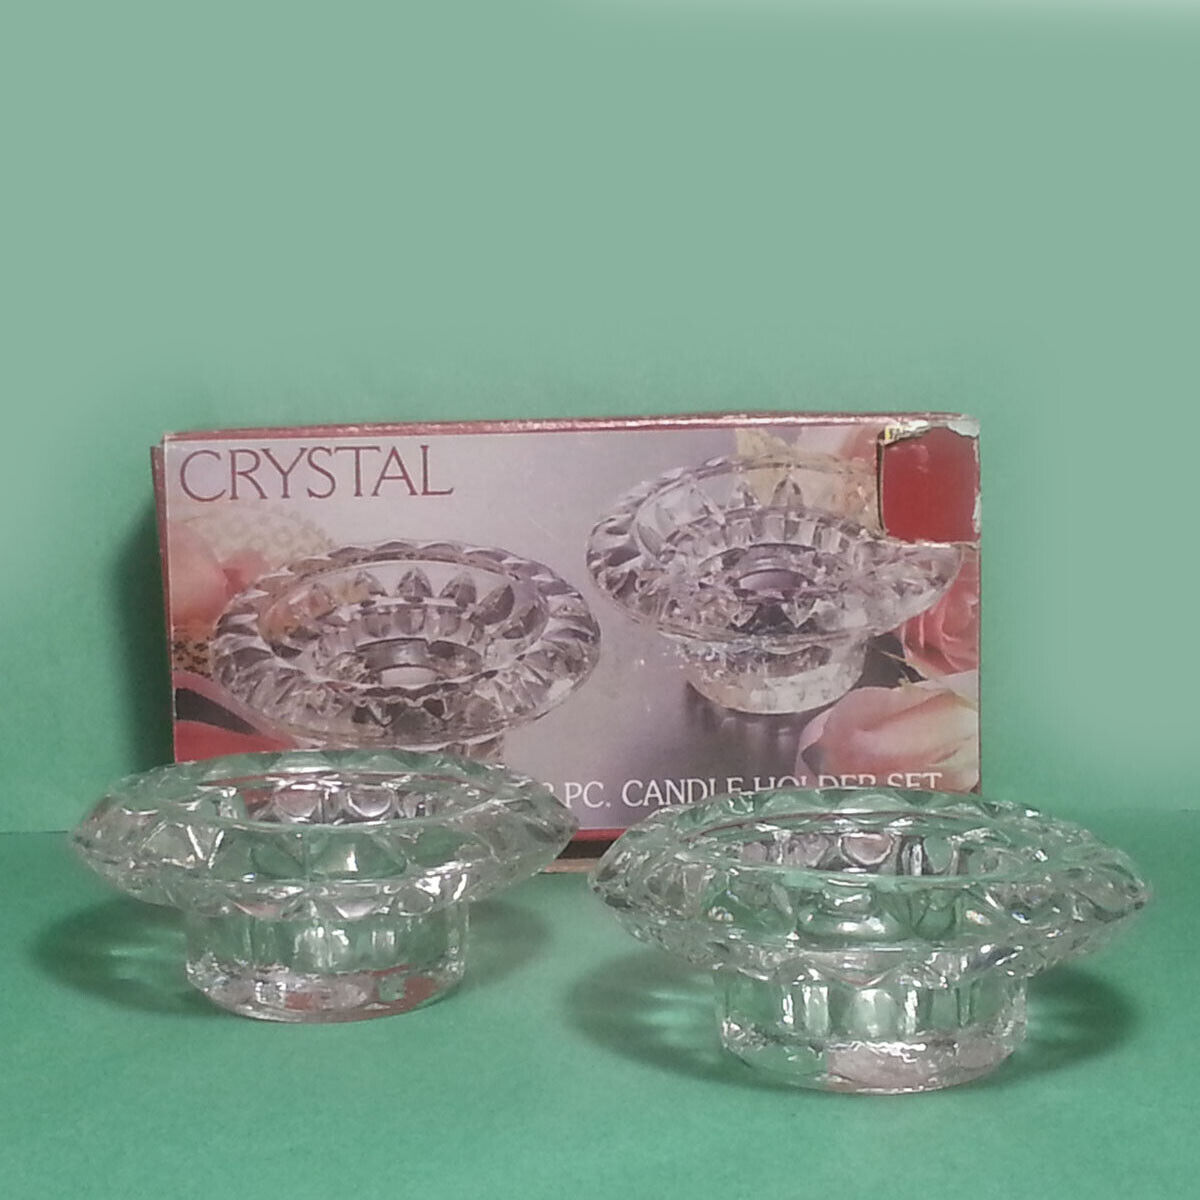 Pair Crystal Candle Holder Perfect for Votive or Tapered Candles by PASARI - $11.64